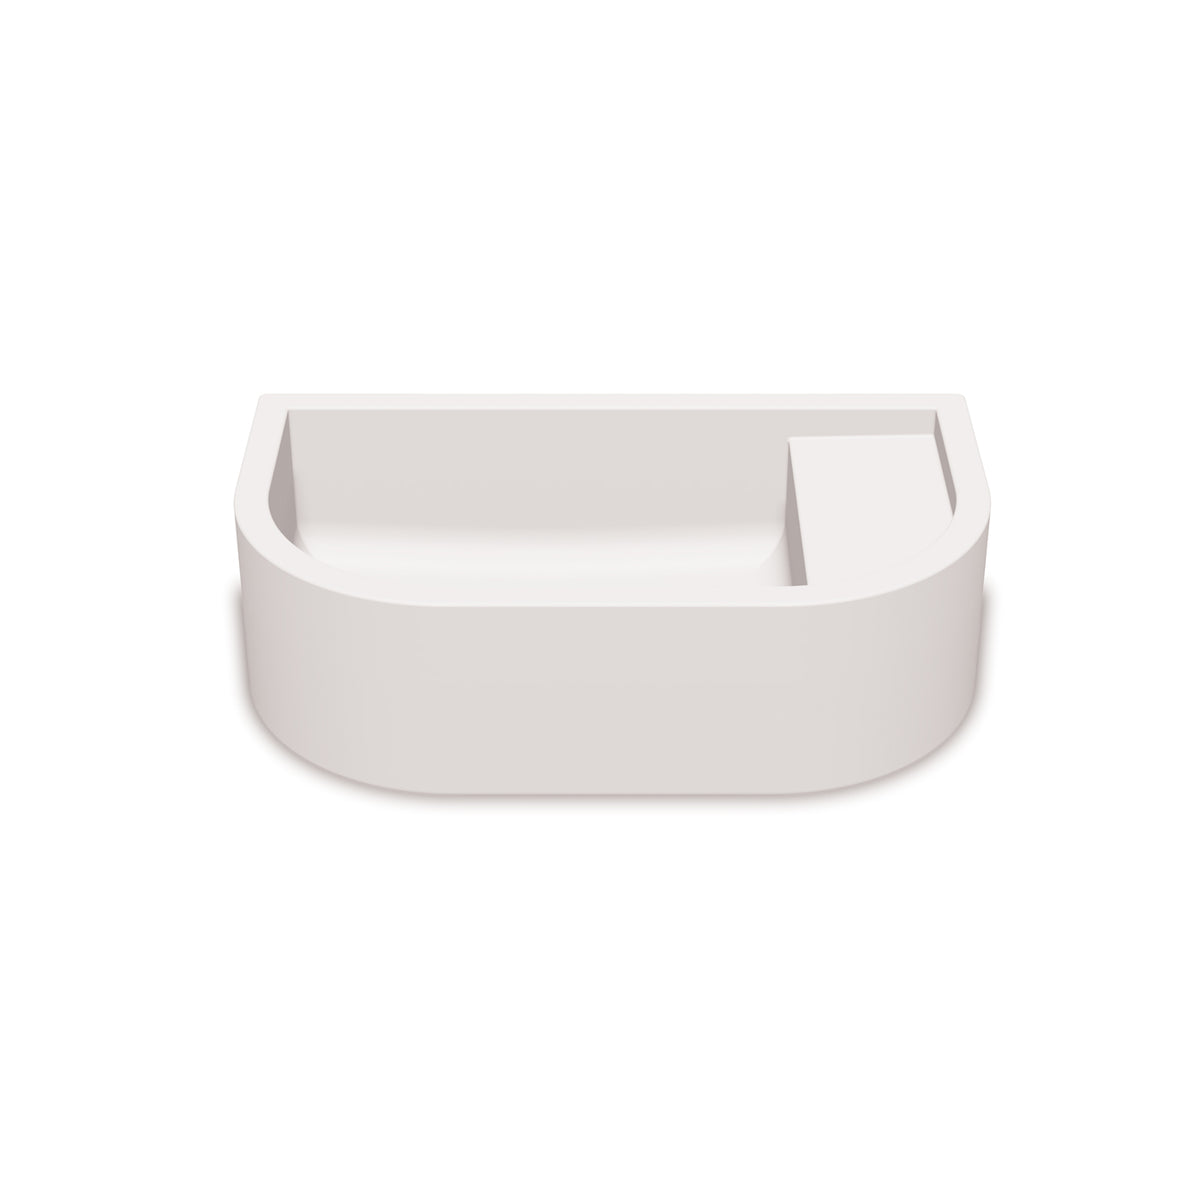 Loop 01 Basin - Overflow - Surface Mount (Ivory,No Tap Hole,Black)